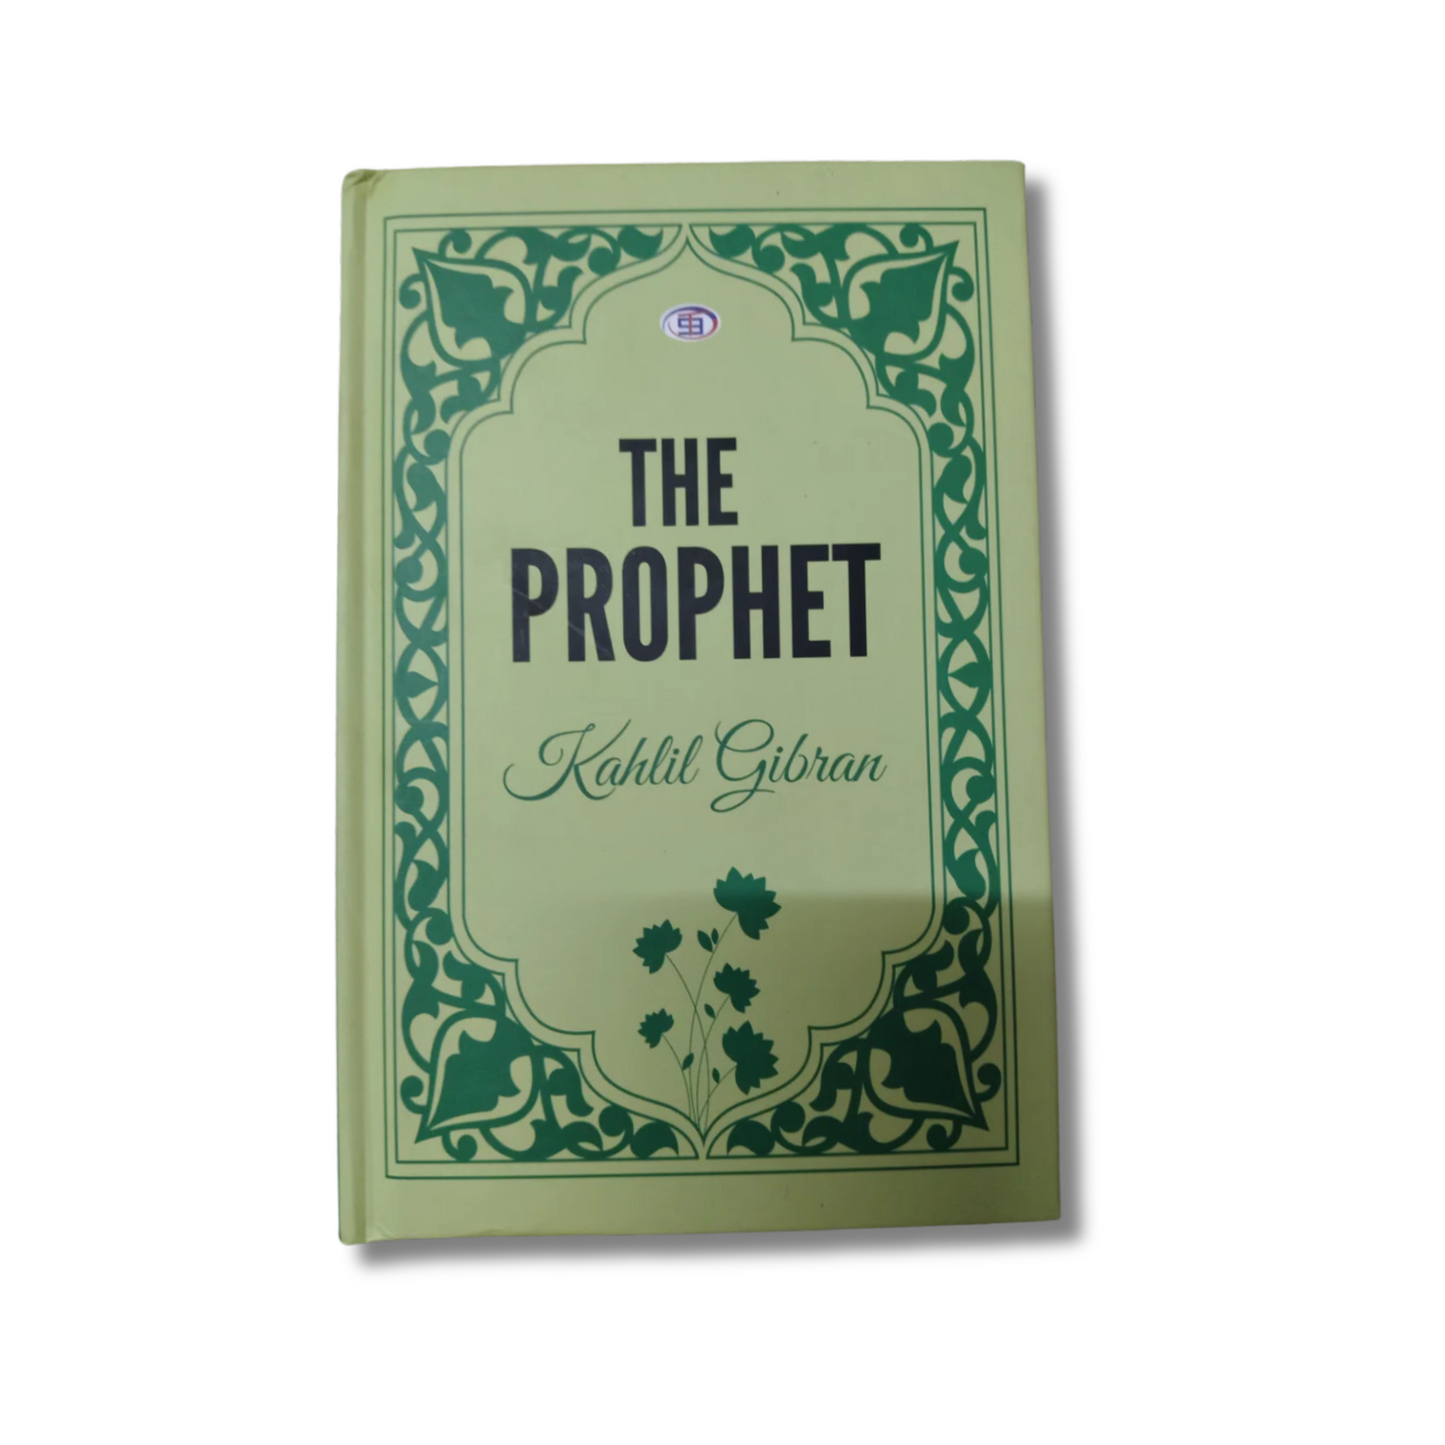 [Hardcover] The Prophet by Kahlil Gibran